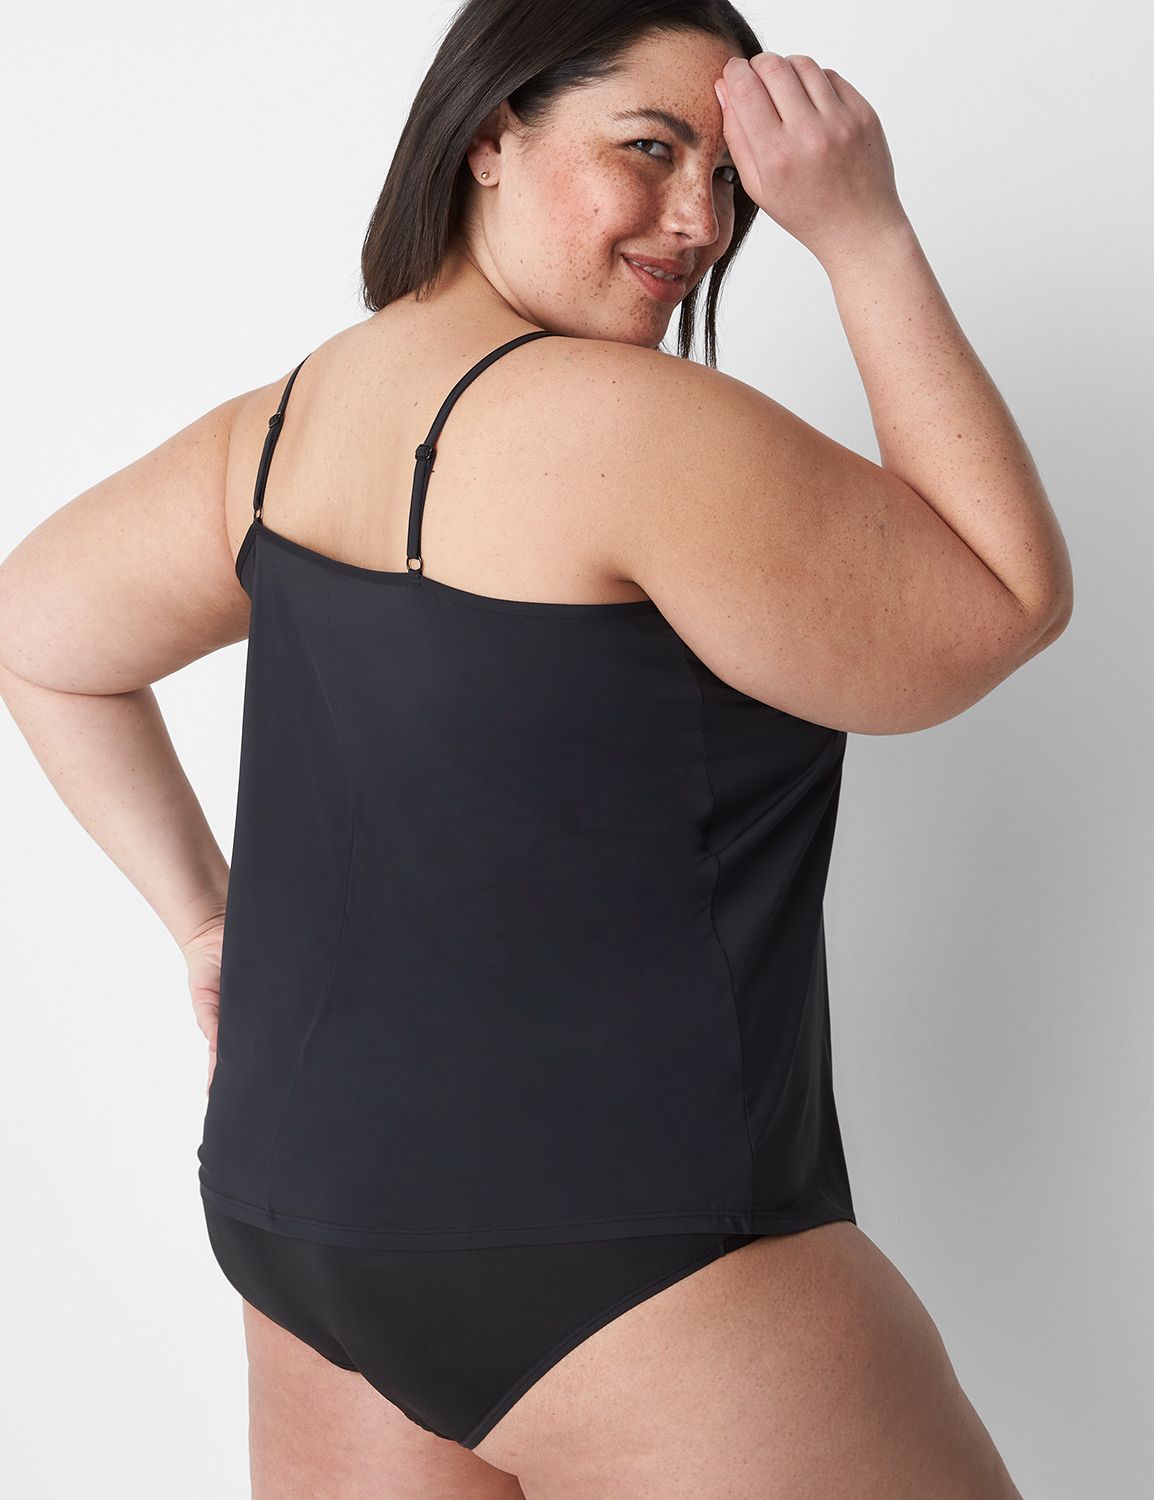 Cacique Black Ultra High Waist Thigh Shaper Plus Size 22/24 Shapewear - $23  - From Misty